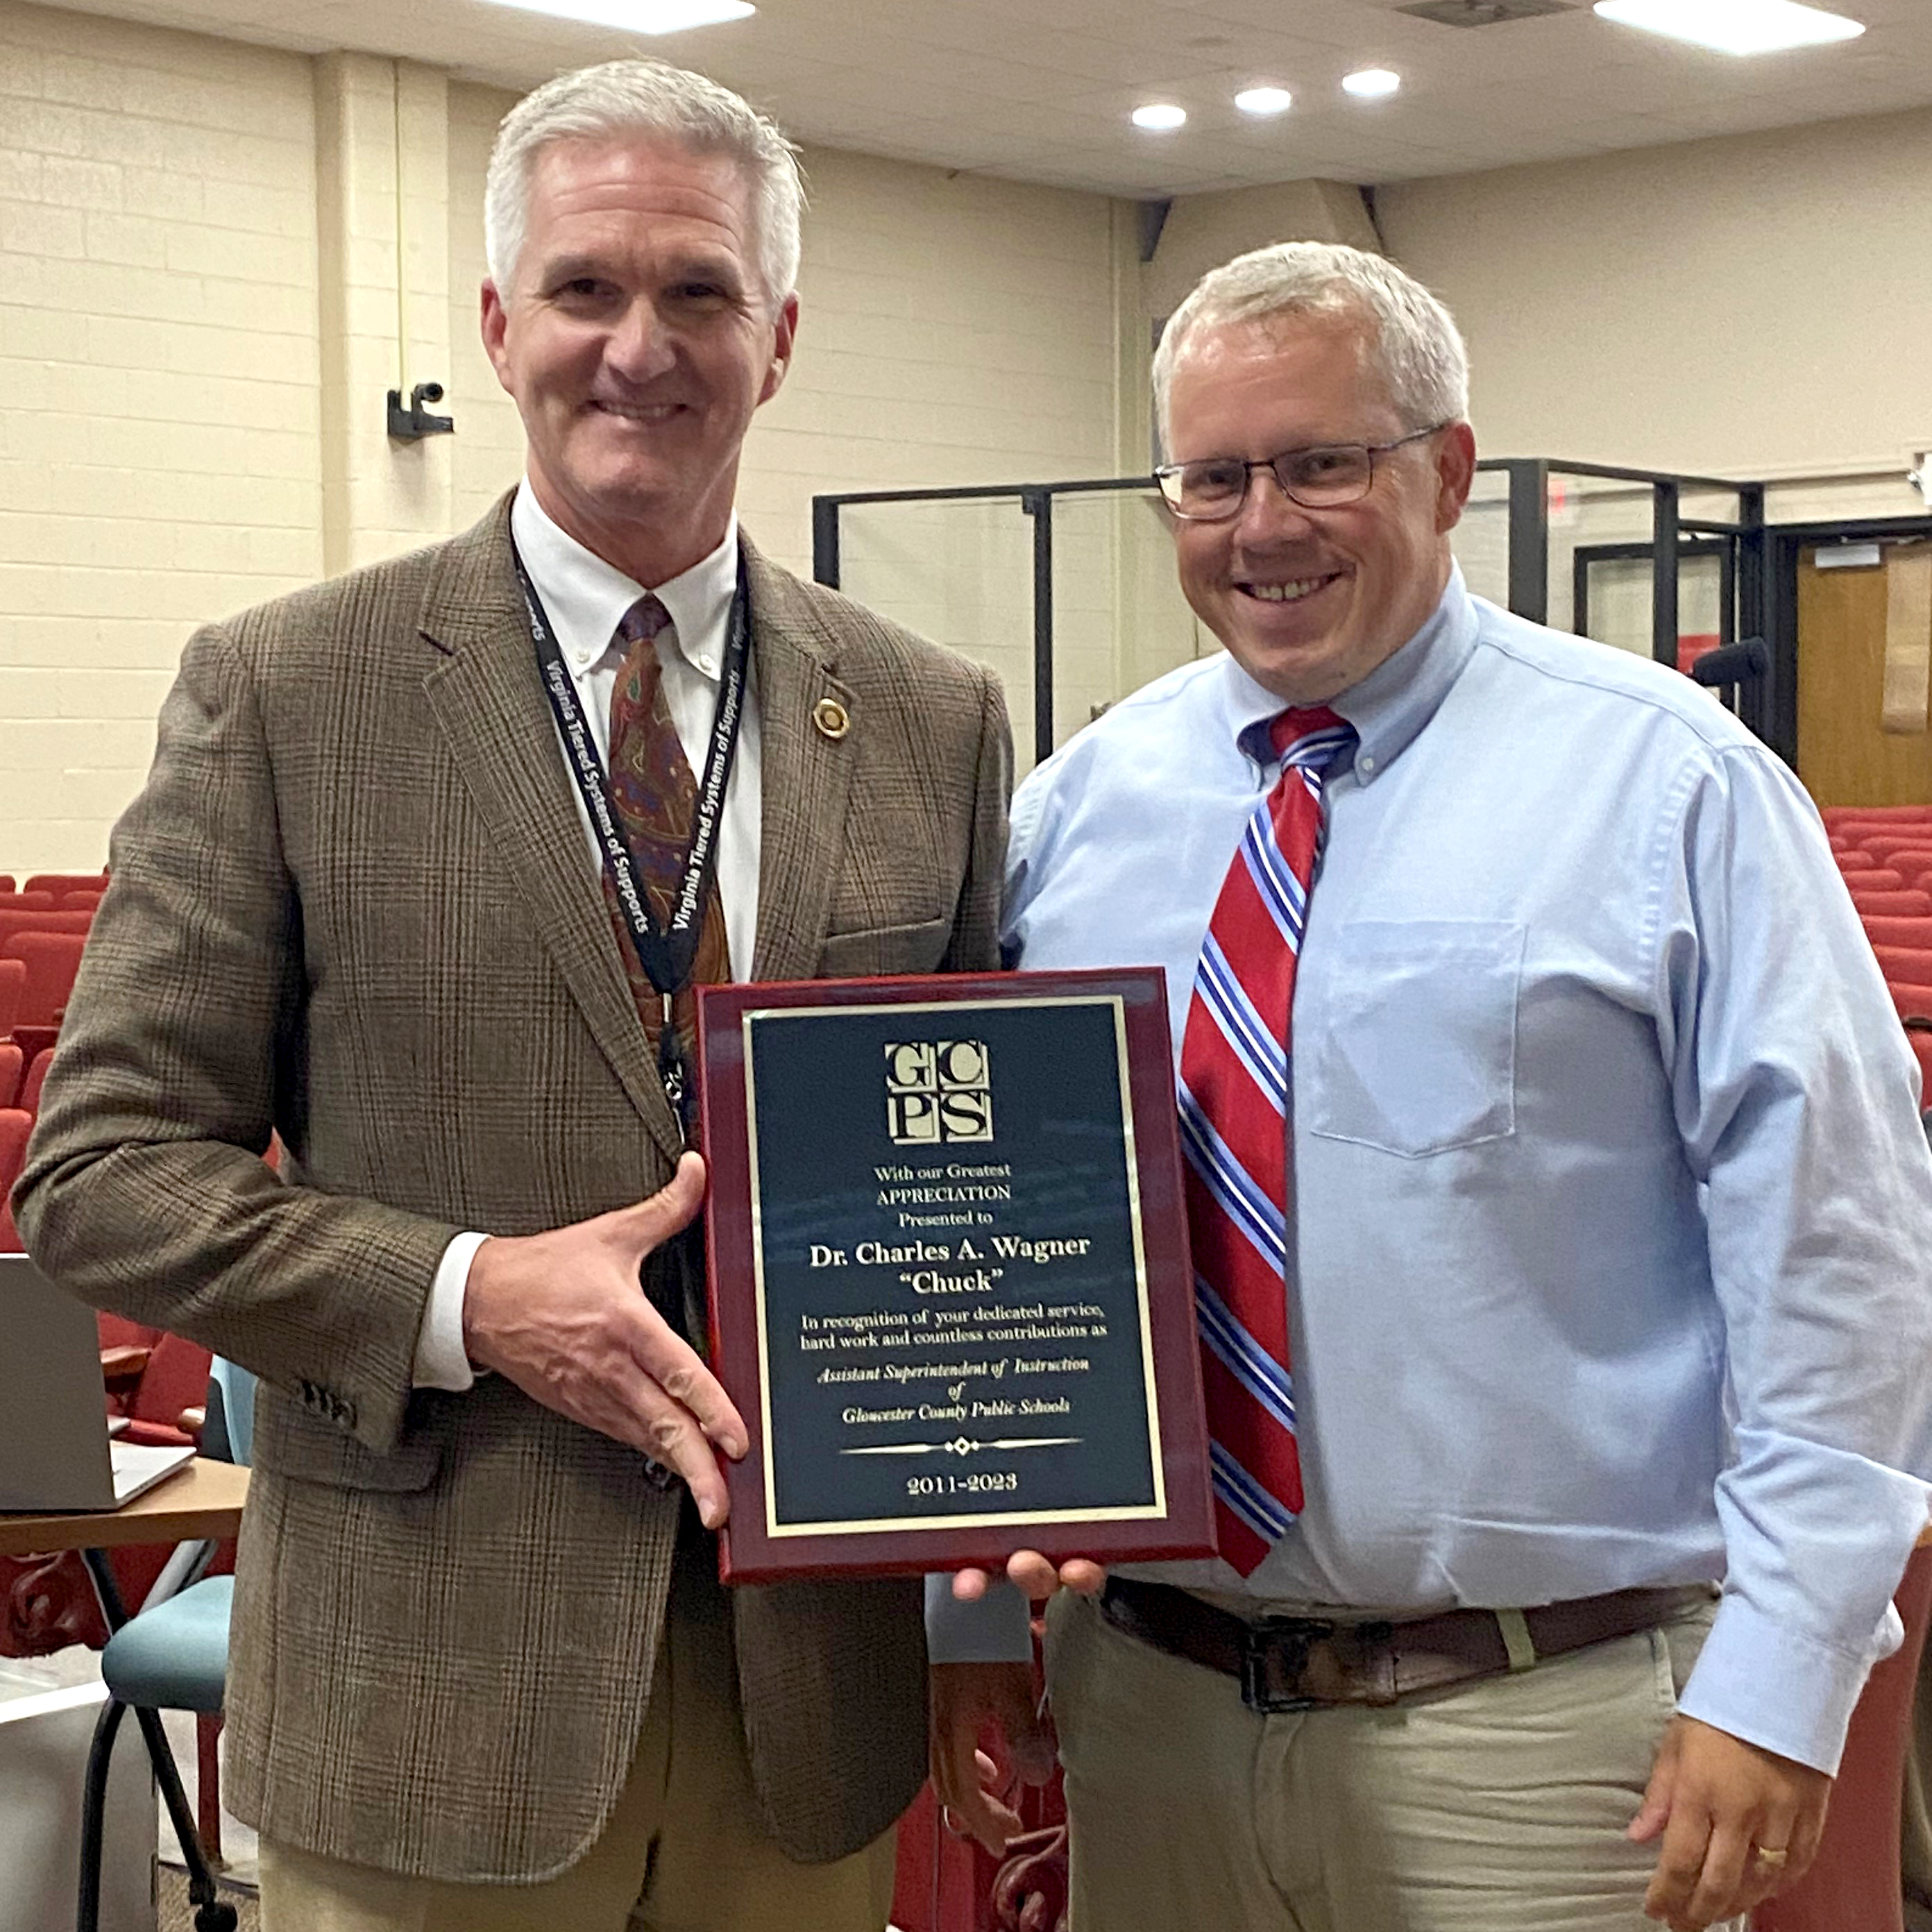 Dr. Wagner is presented with a plaque by Troy Andersen in appreciation and recognition for all his work as assistant superintendent. 